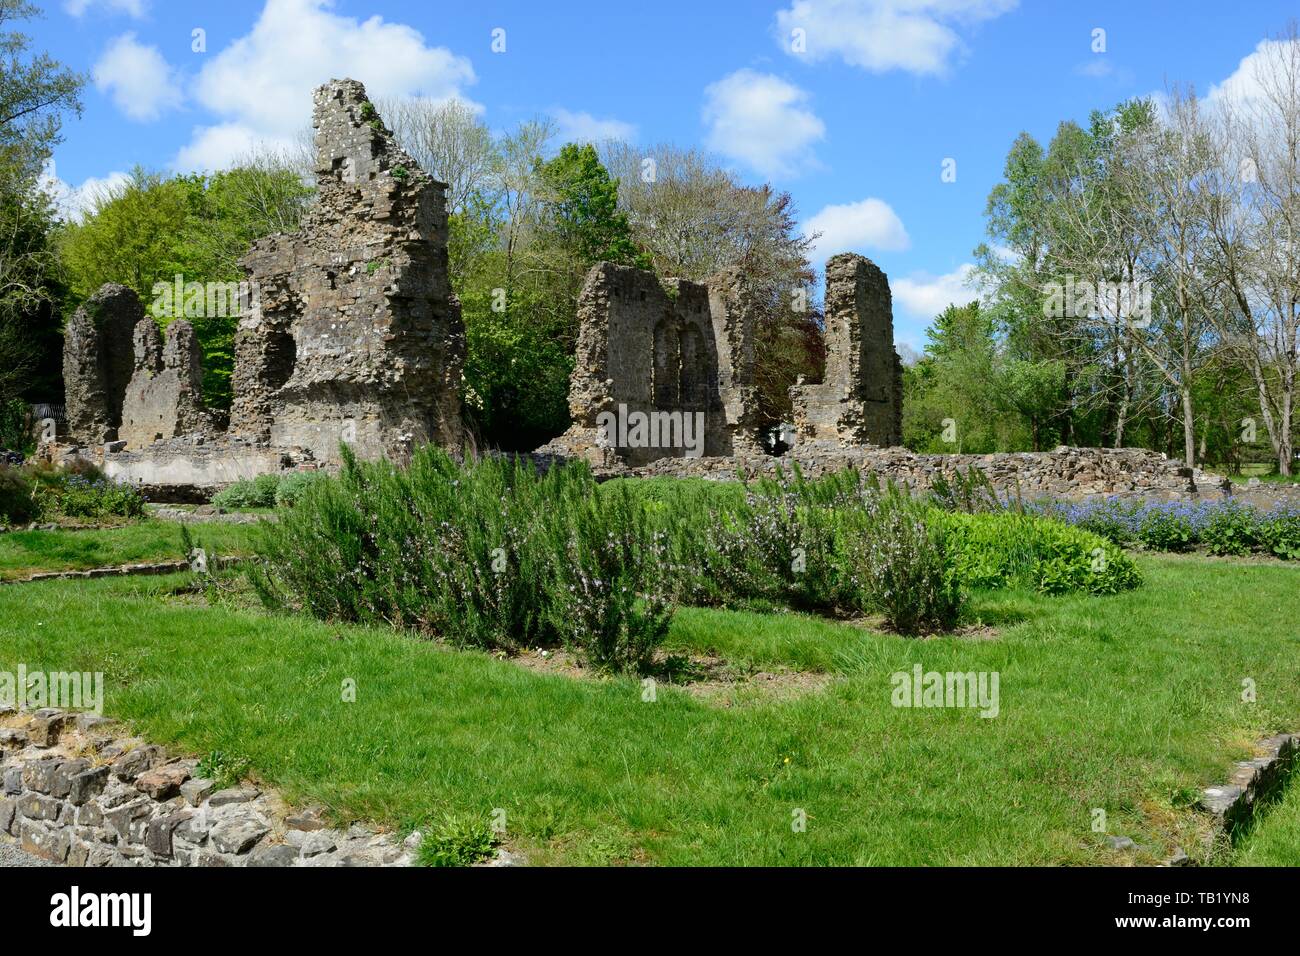 Haverfordwest Priory early 13th century Augustinian priory with the only remaining ecclesiastical medieval garden in Britain Pembrokeshire Wales UK Stock Photo